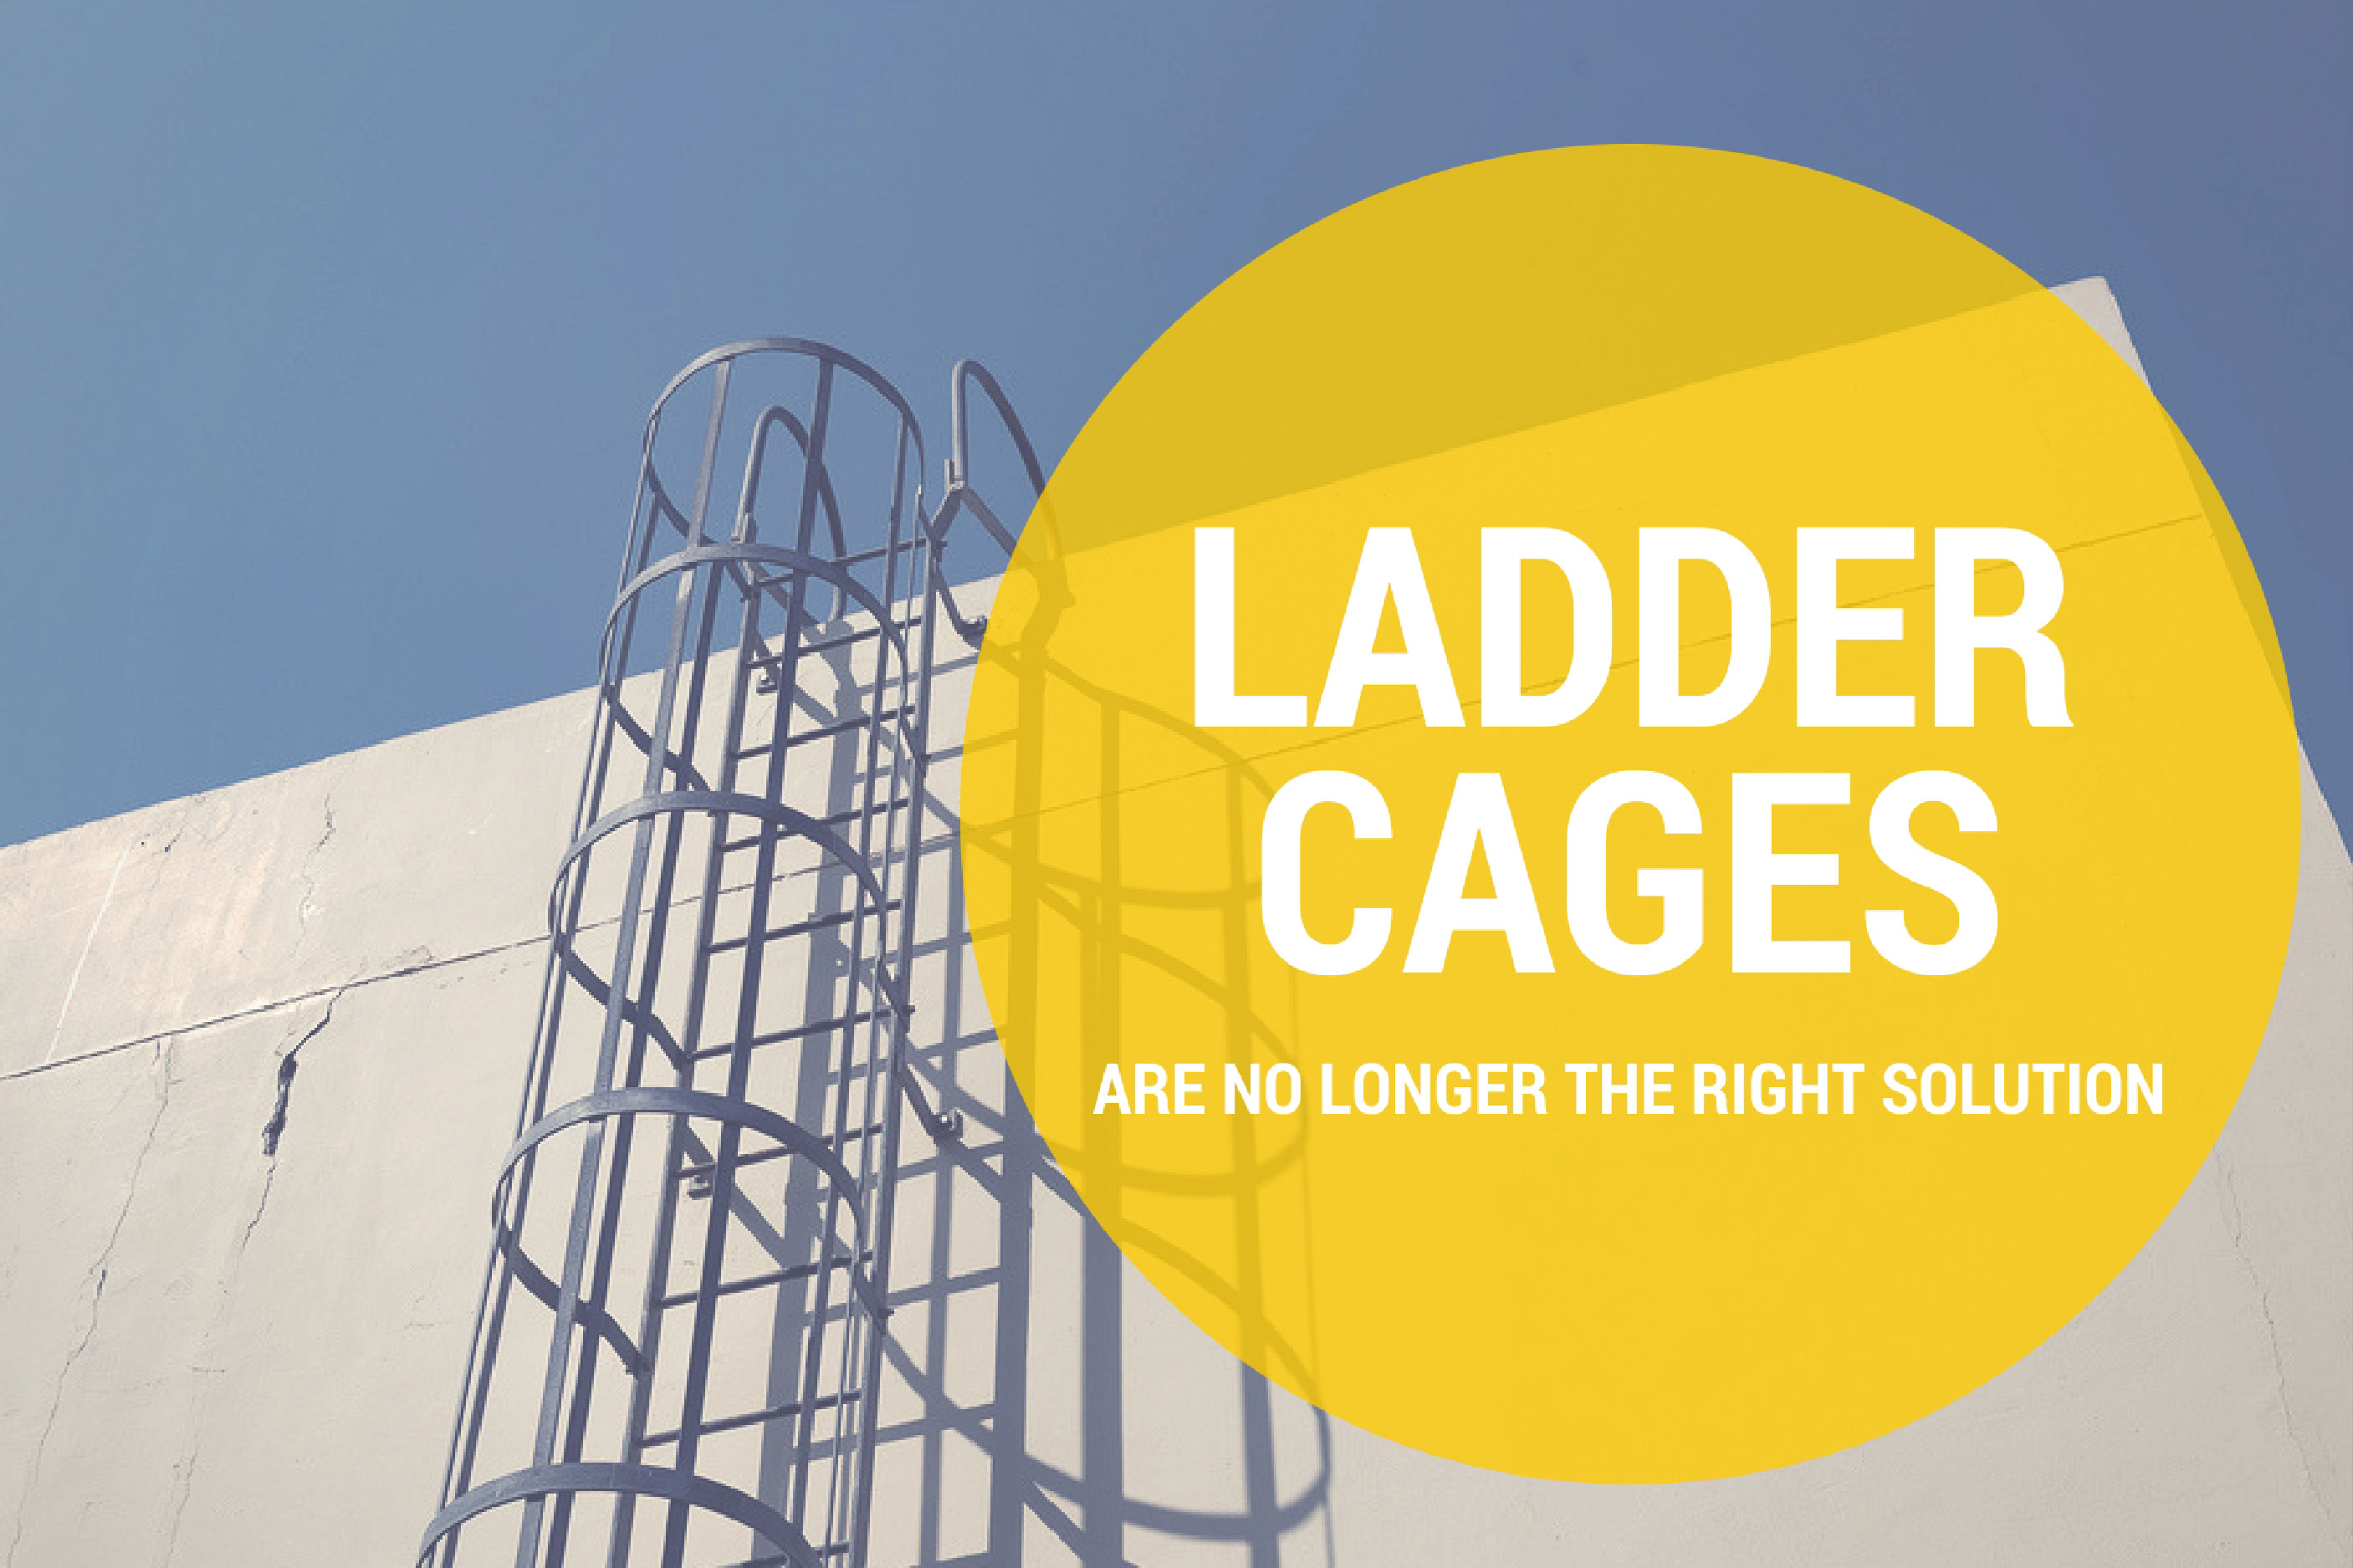 Ladder Cages Are No Longer OSHA compliant